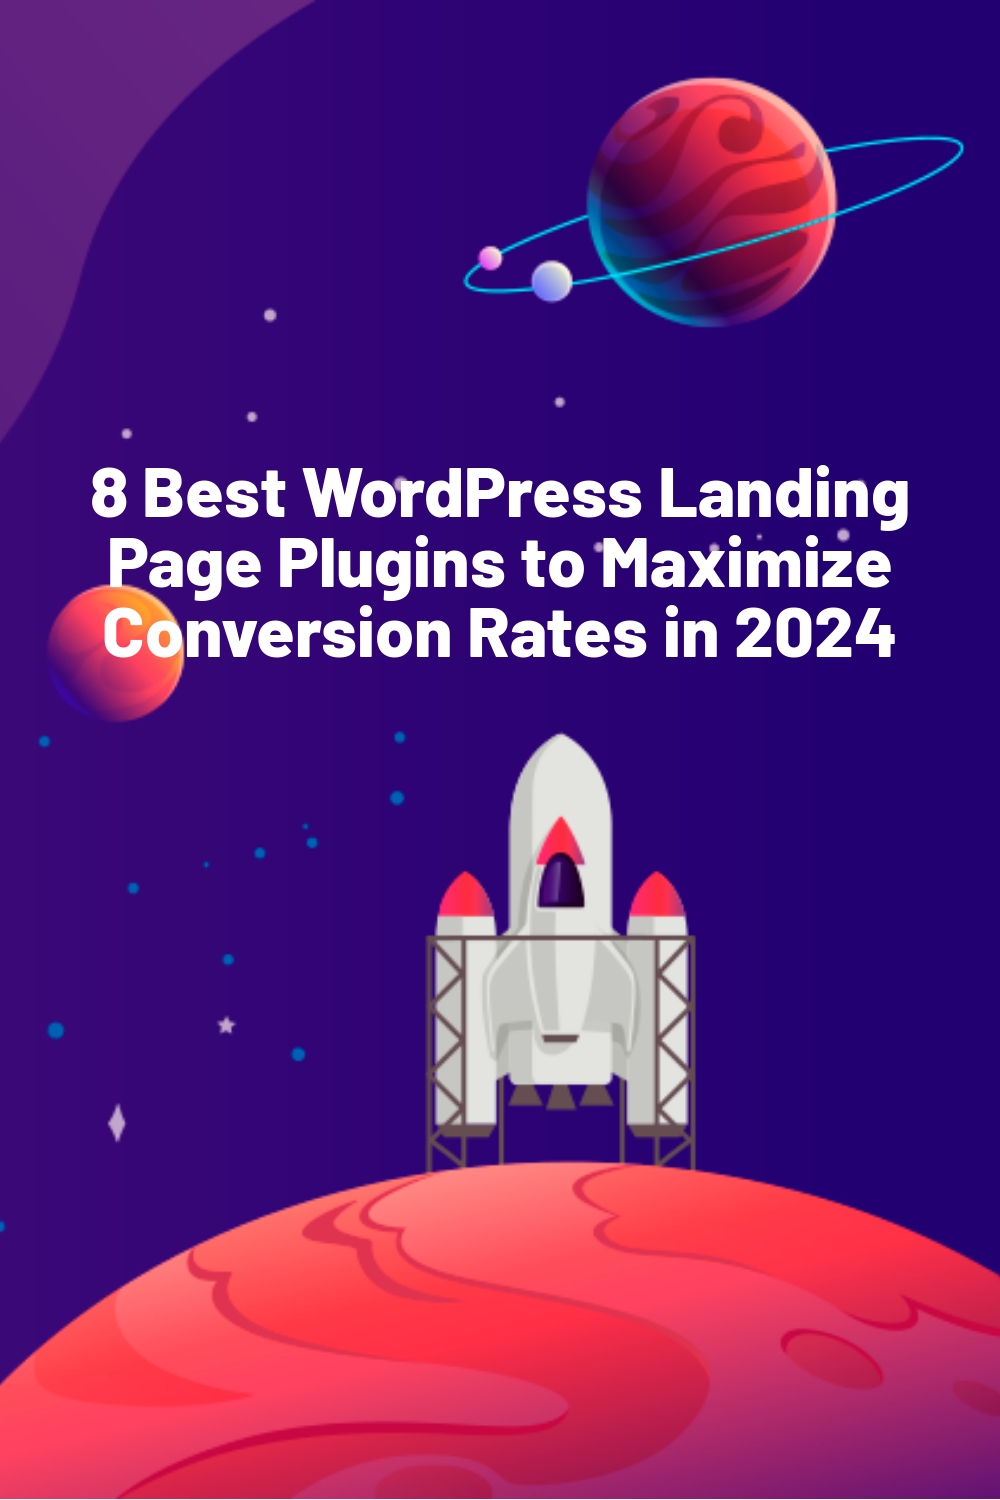 8 Best WordPress Landing Page Plugins to Maximize Conversion Rates in 2024